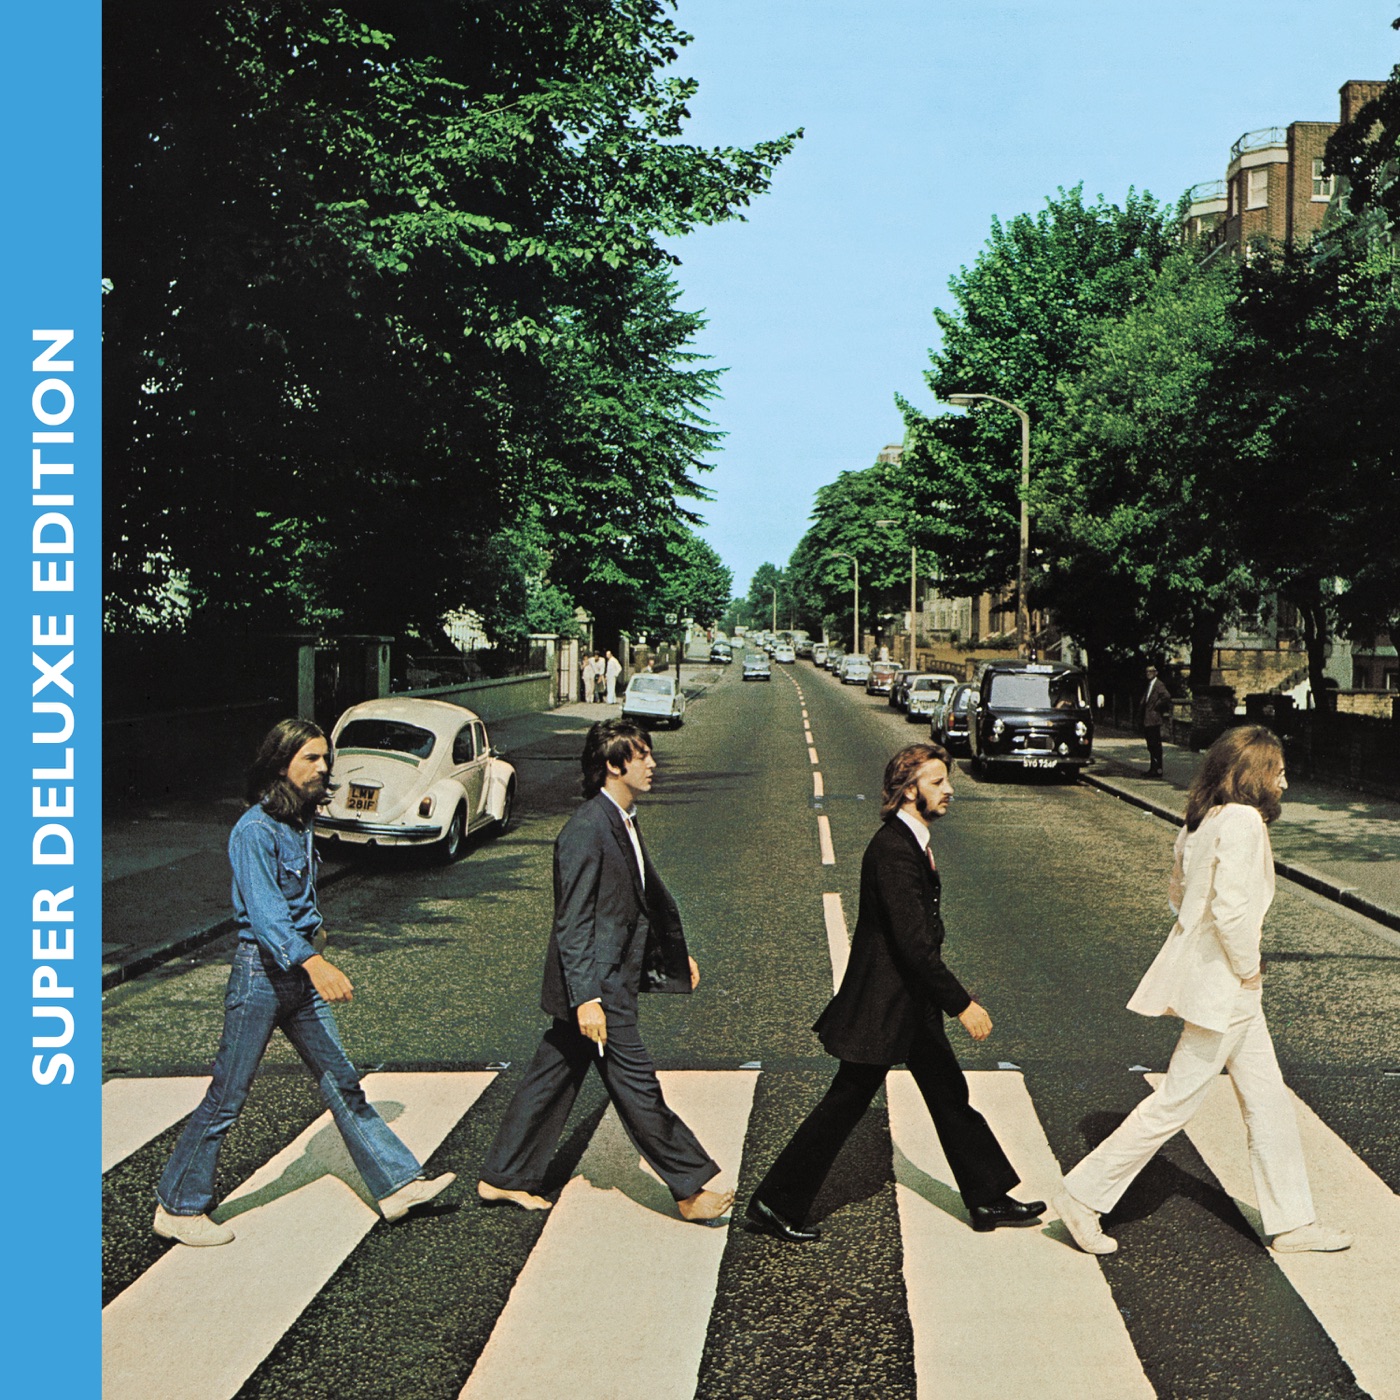 Abbey Road (Super Deluxe Edition) (2019 Remix & Remaster) by The Beatles